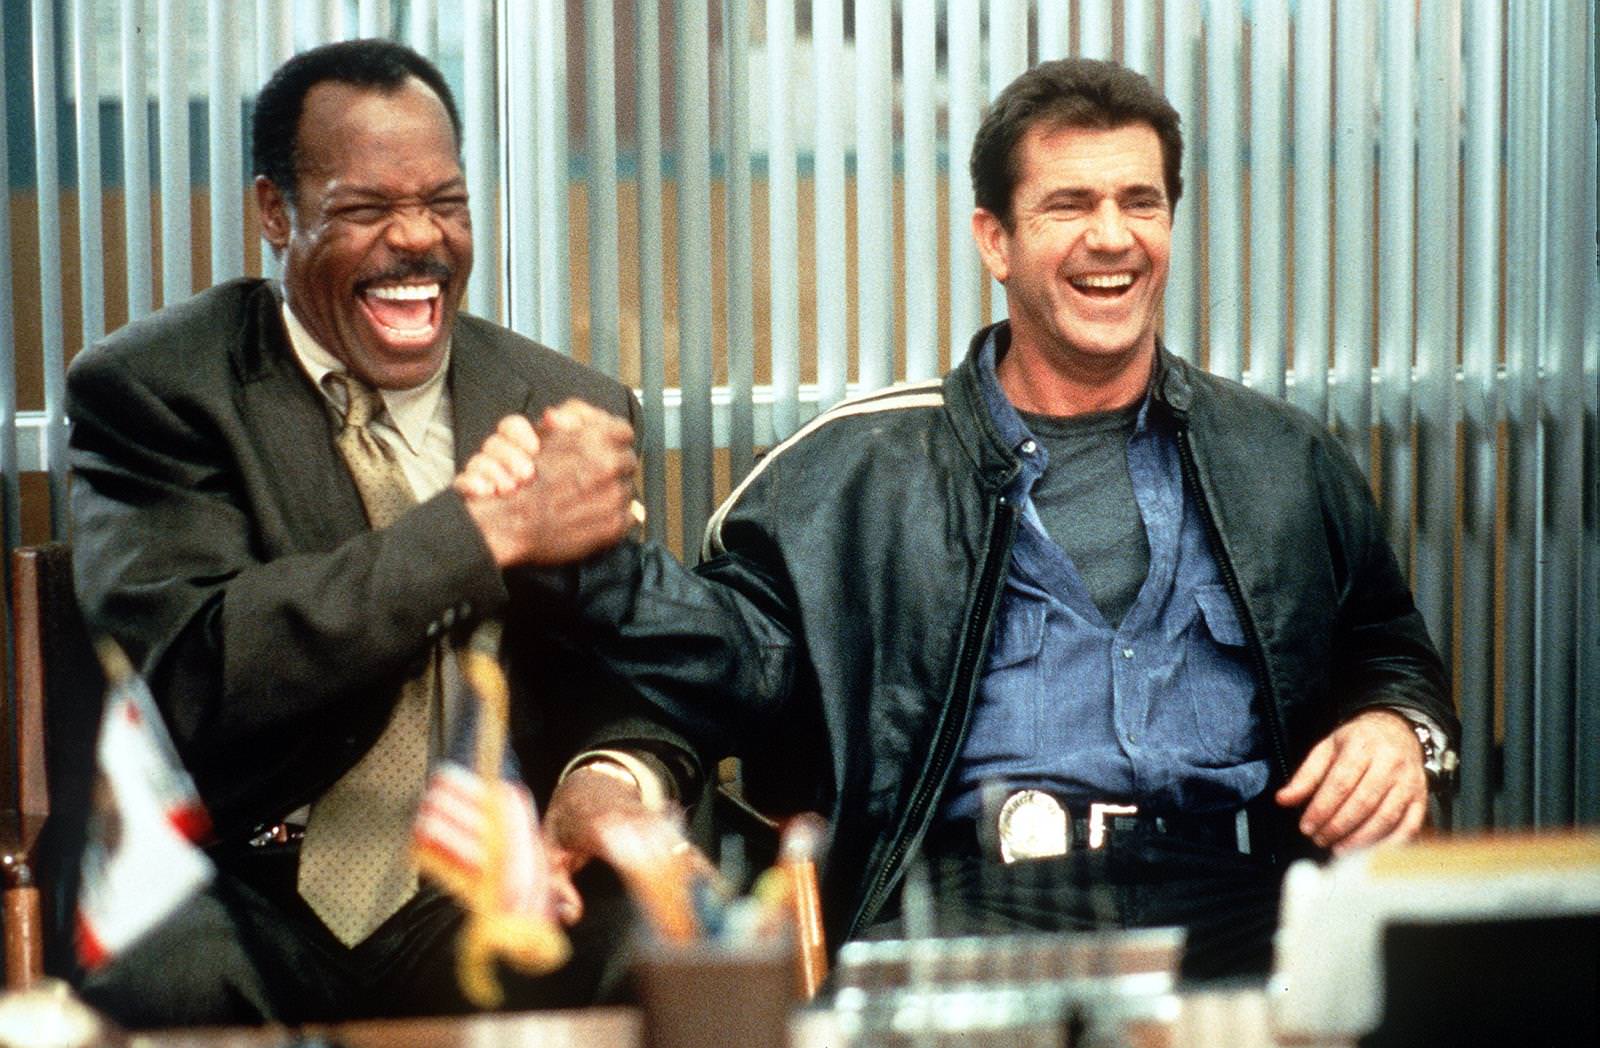 lethal_weapon_4_4